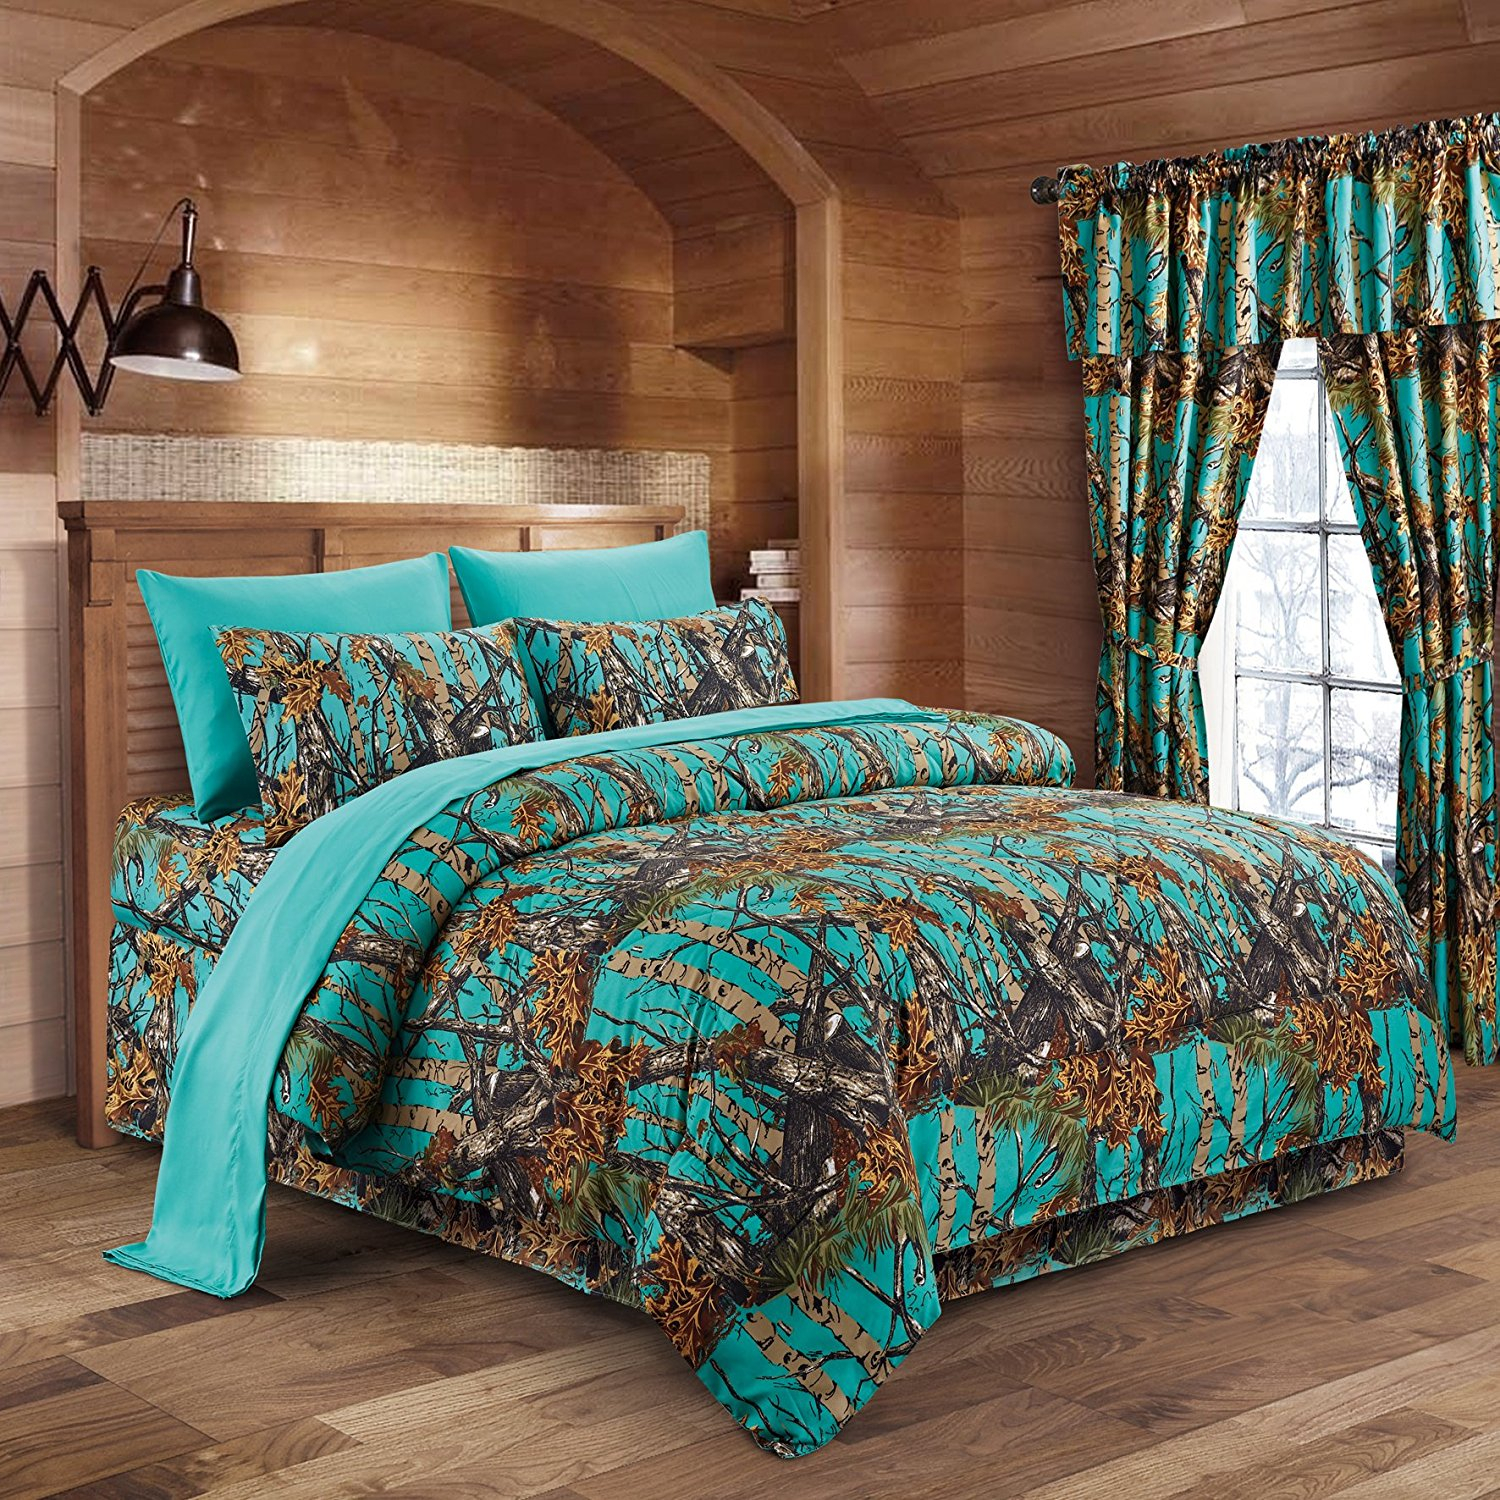 The Woods Teal Camouflage Queen 8pc Premium Luxury Comforter Sheet Pillowcases And Bed Skirt Set Regal Comfort Camo Bedding Set For Hunters intended for size 1500 X 1500